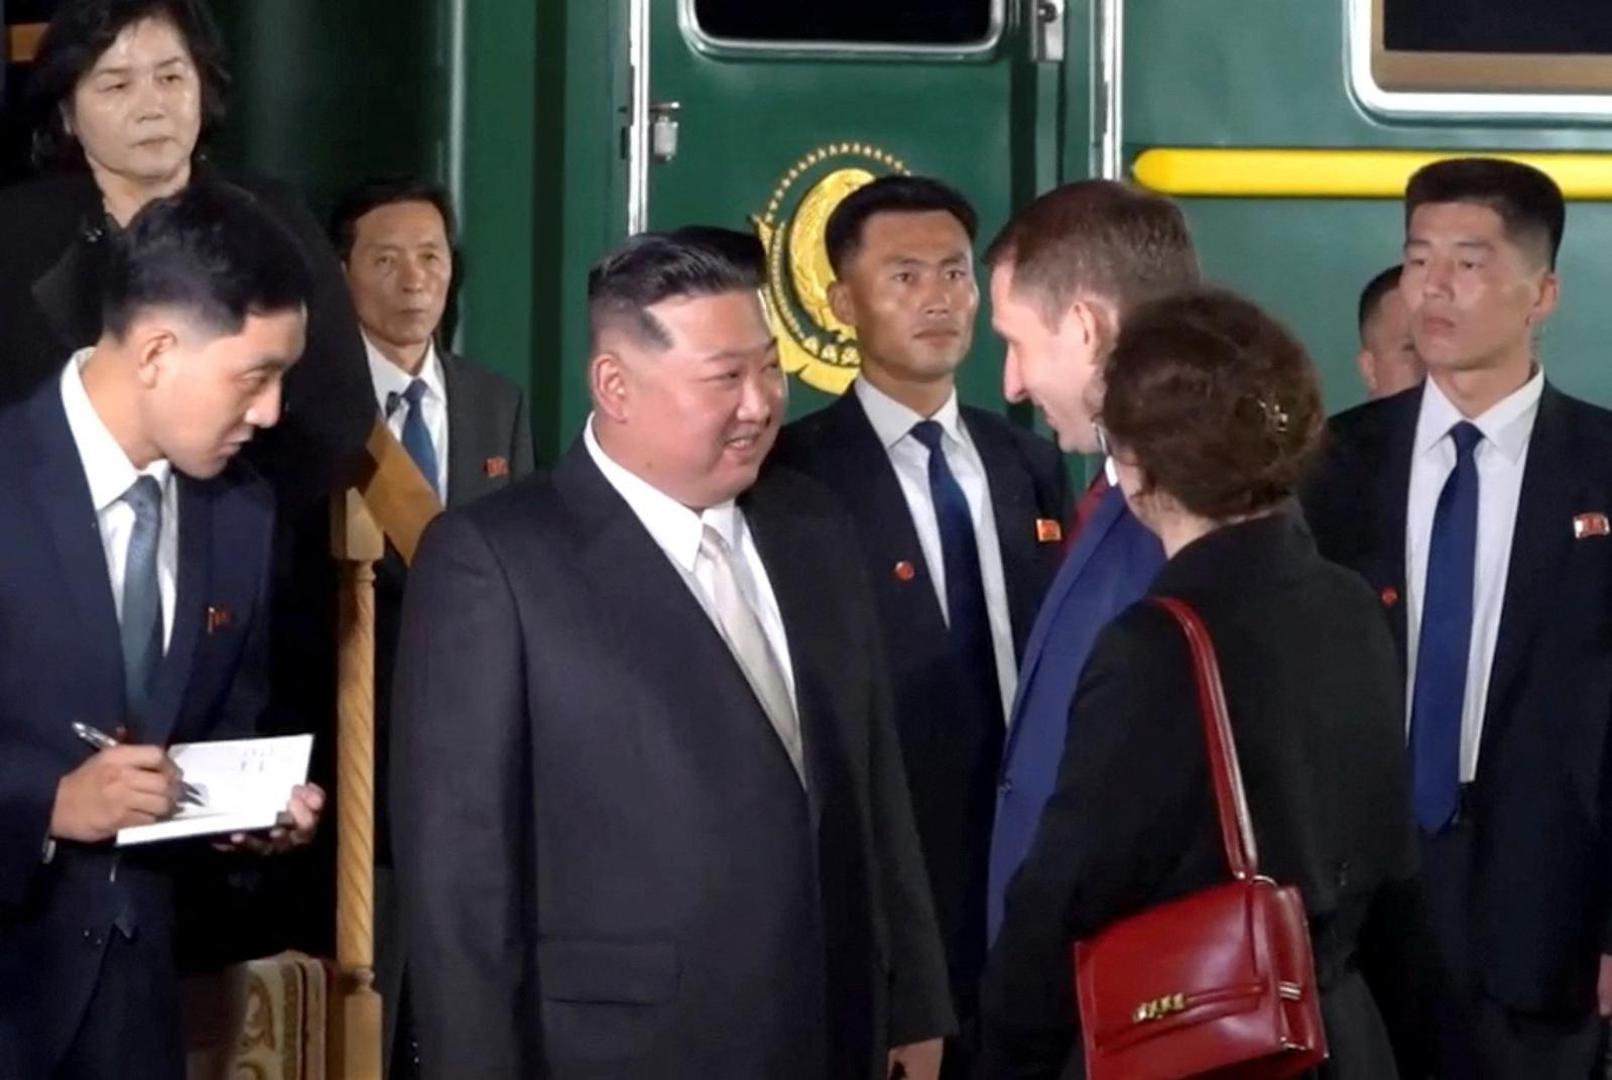 A view shows North Korean leader Kim Jong Un disembarking from his train and being greeted by Russian officials upon his arrival in Khasan in the Primorsky region, Russia, in this still image from video published September 12, 2023. Courtesy Governor of Russia's Primorsky Krai Oleg Kozhemyako Telegram Channel via REUTERS ATTENTION EDITORS - THIS IMAGE WAS PROVIDED BY A THIRD PARTY. NO RESALES. NO ARCHIVES. MANDATORY CREDIT. THIS PICTURE WAS PROCESSED BY REUTERS TO ENHANCE QUALITY. AN UNPROCESSED VERSION HAS BEEN PROVIDED SEPARATELY. Photo: OLEG KOZHEMYAKO TELEGRAM CHANNEL/REUTERS